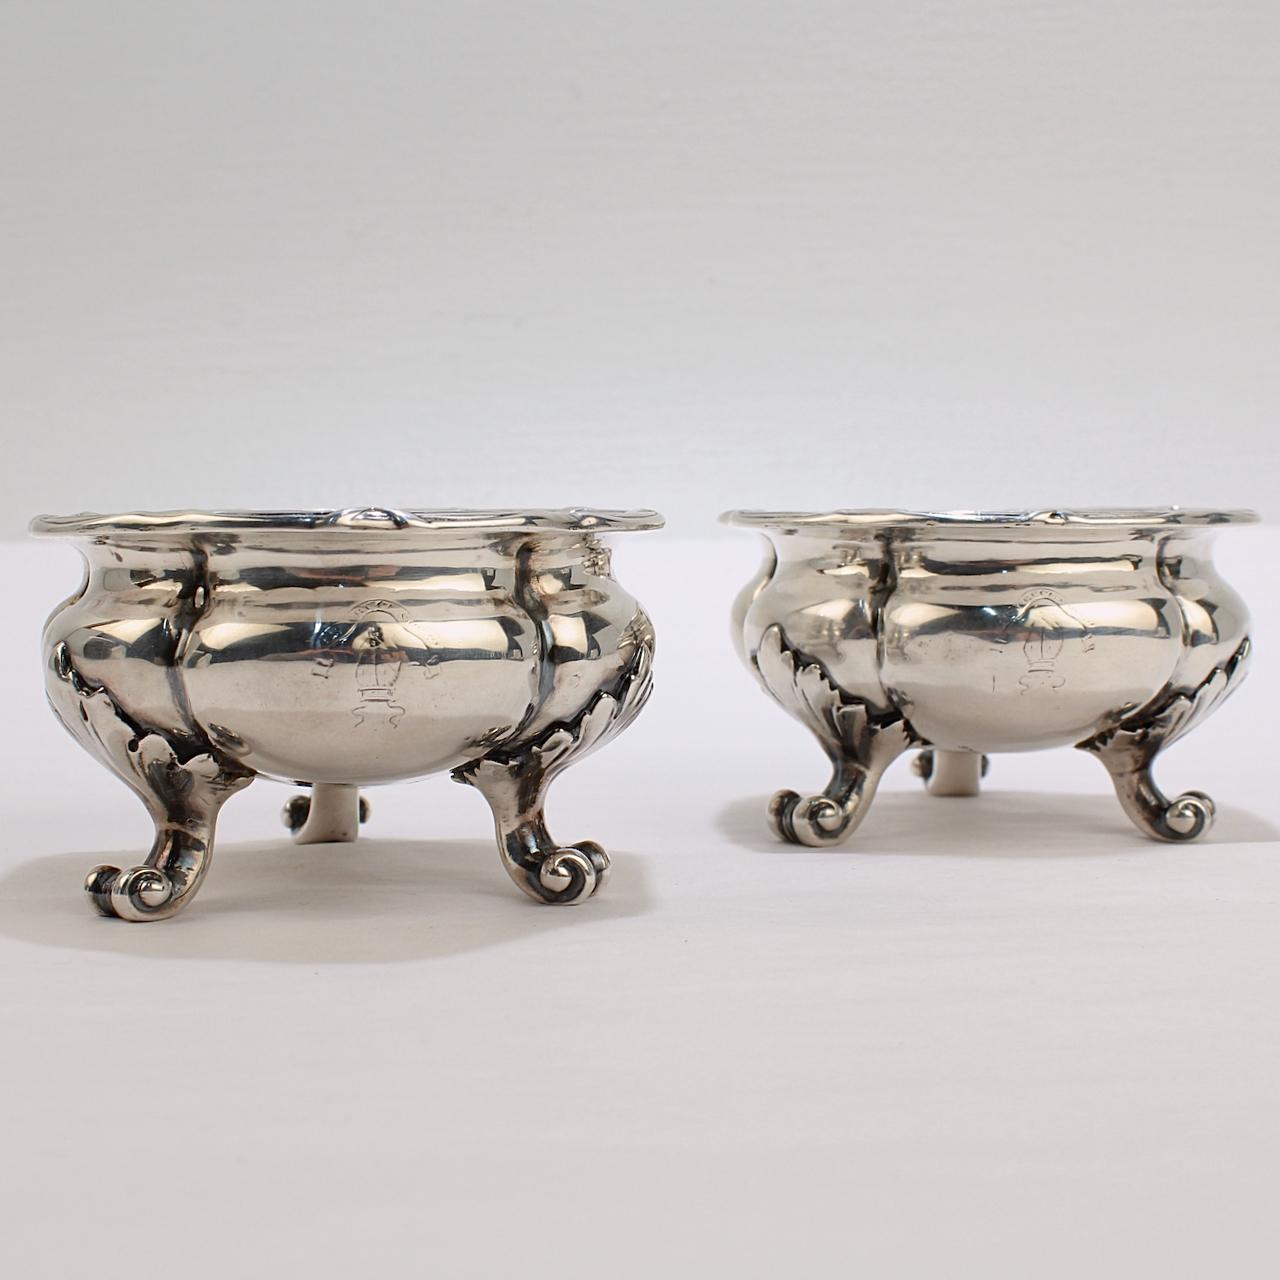 A very fine pair of Victorian sterling silver salt cellars.

By Hunt & Roskell - the successors to Storr, Mortimer, and Hunt.

With scrolled feet, lobed bodies, and a ribbed rim.

Simply a very well smithed pair of salt cellars by important